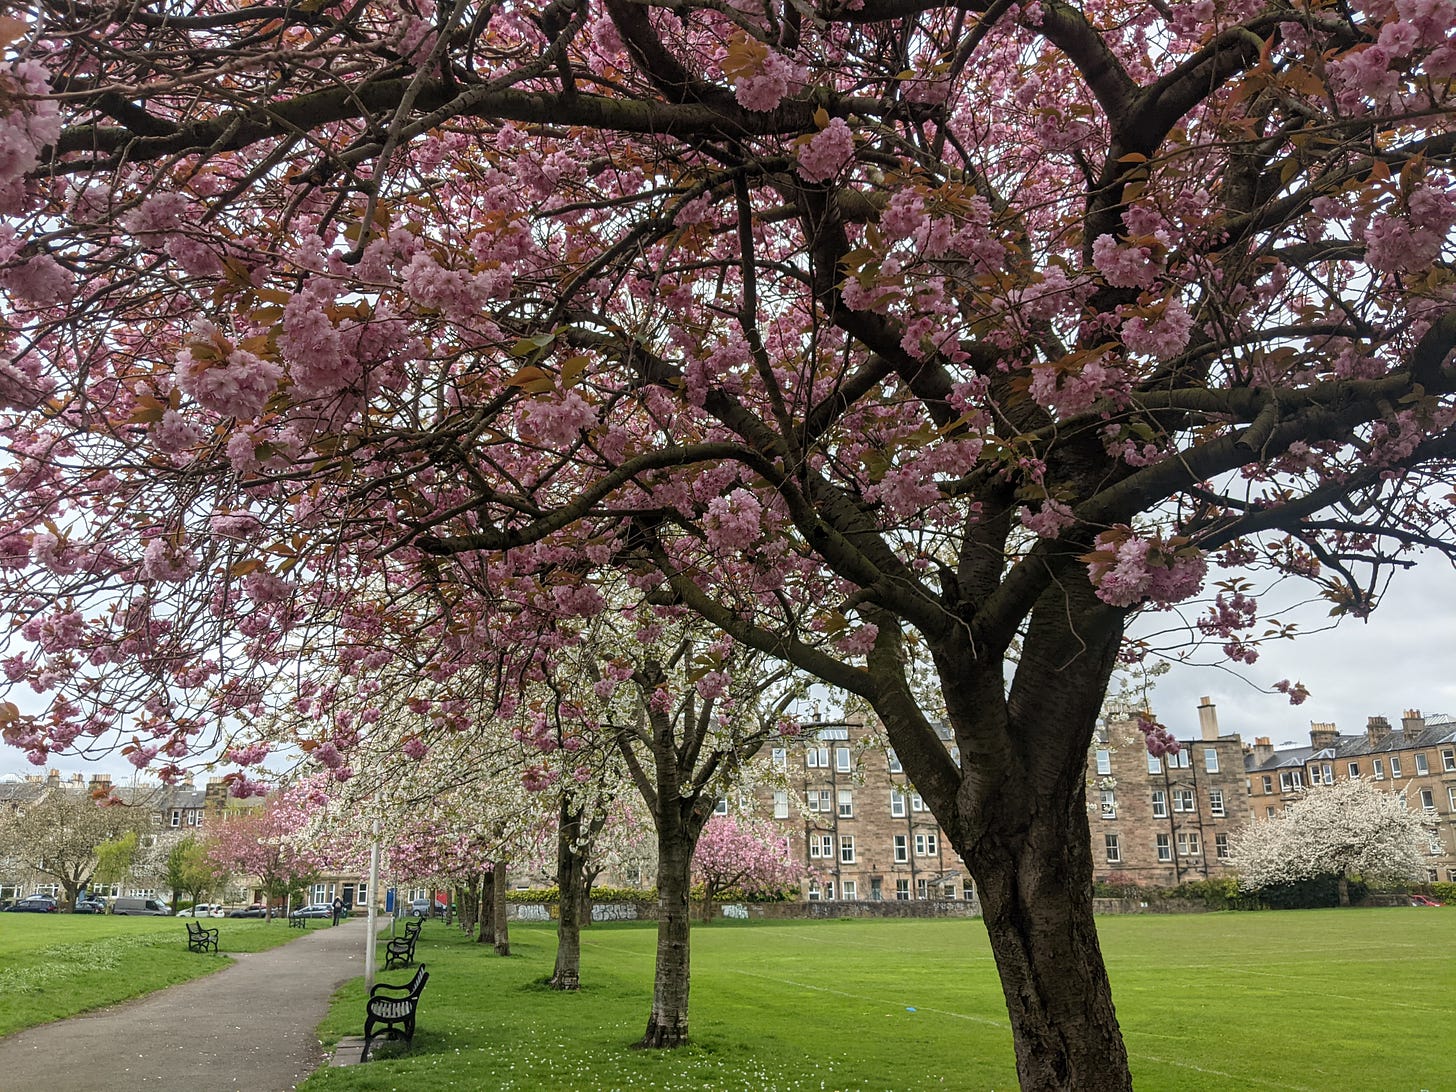 Cherry blossoms in bloom with traditional Edinburgh tenements in the background.